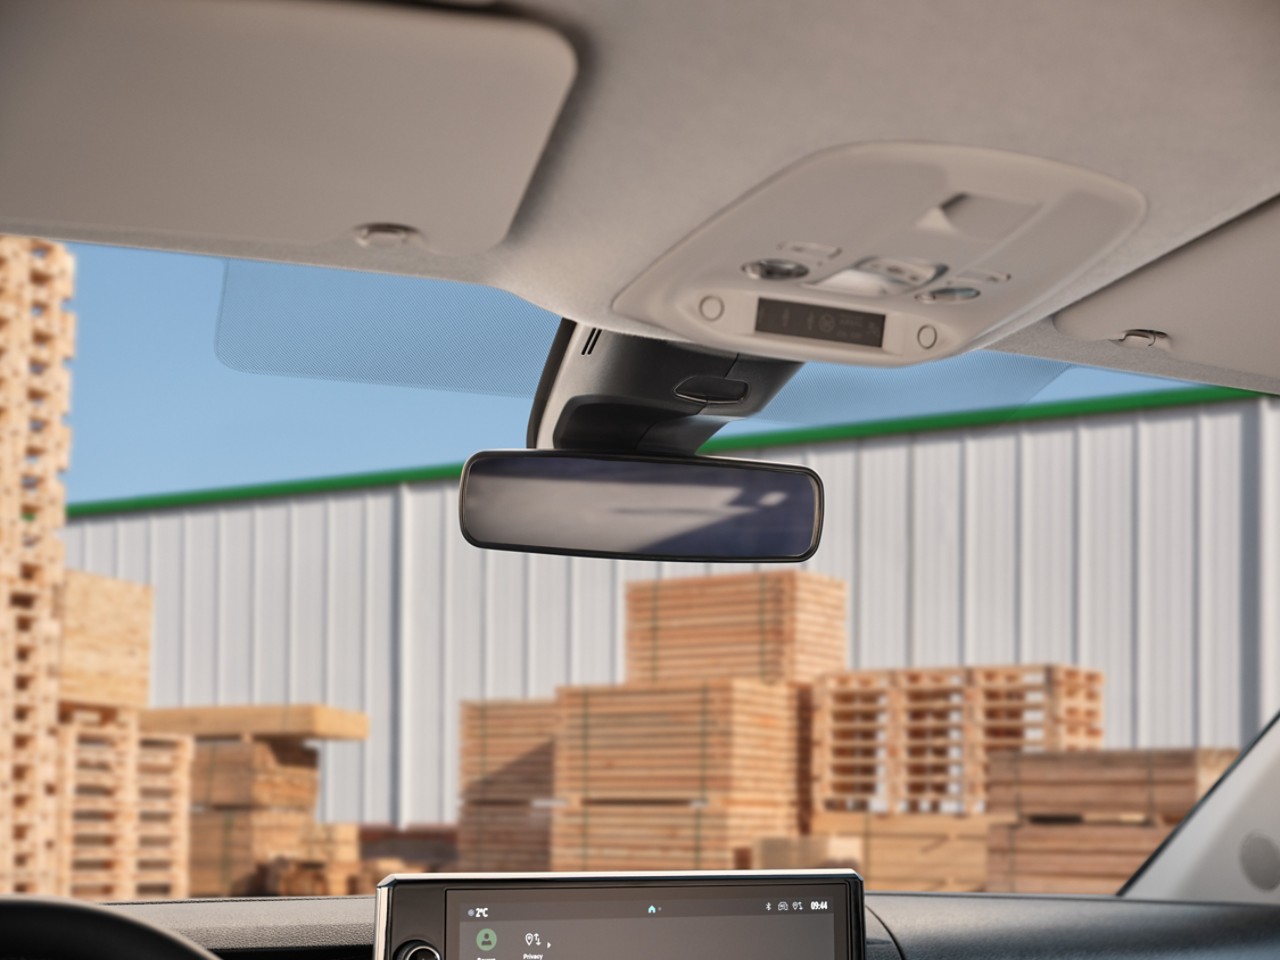 Digital rear-view mirror provides a clean, unobstructed rear view 